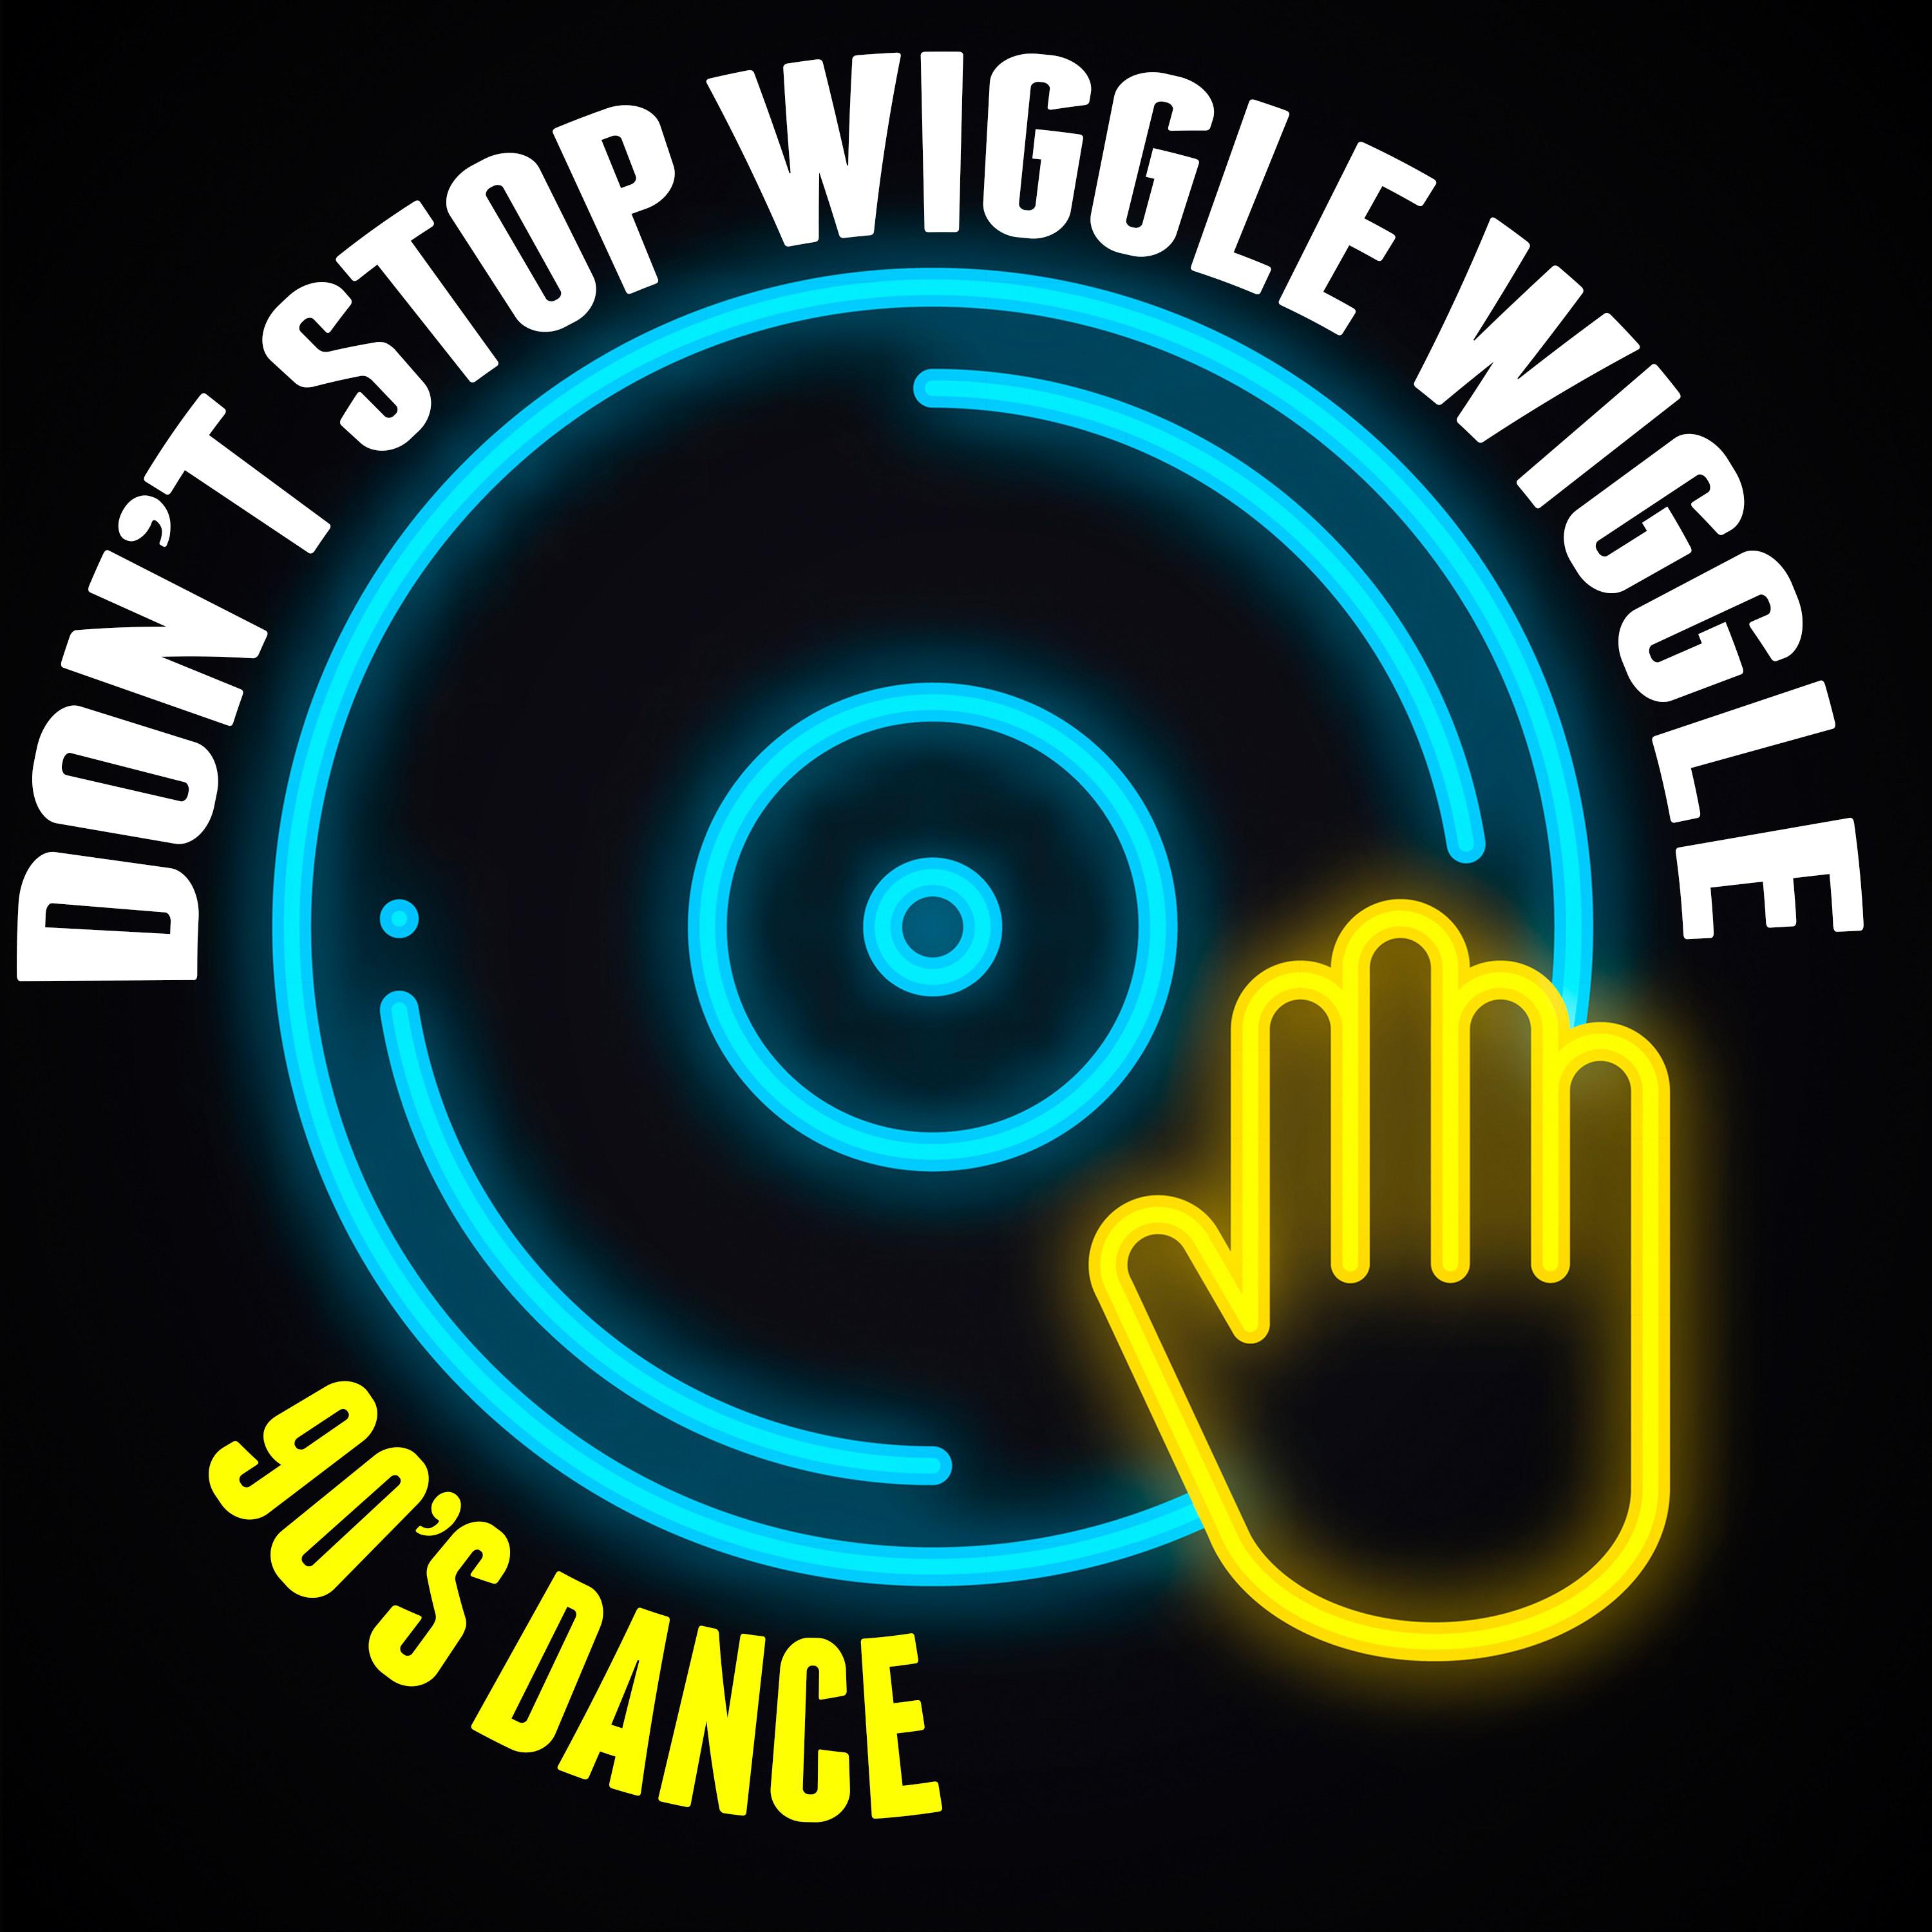 Don't Stop (Wiggle Wiggle) [90's Dance]